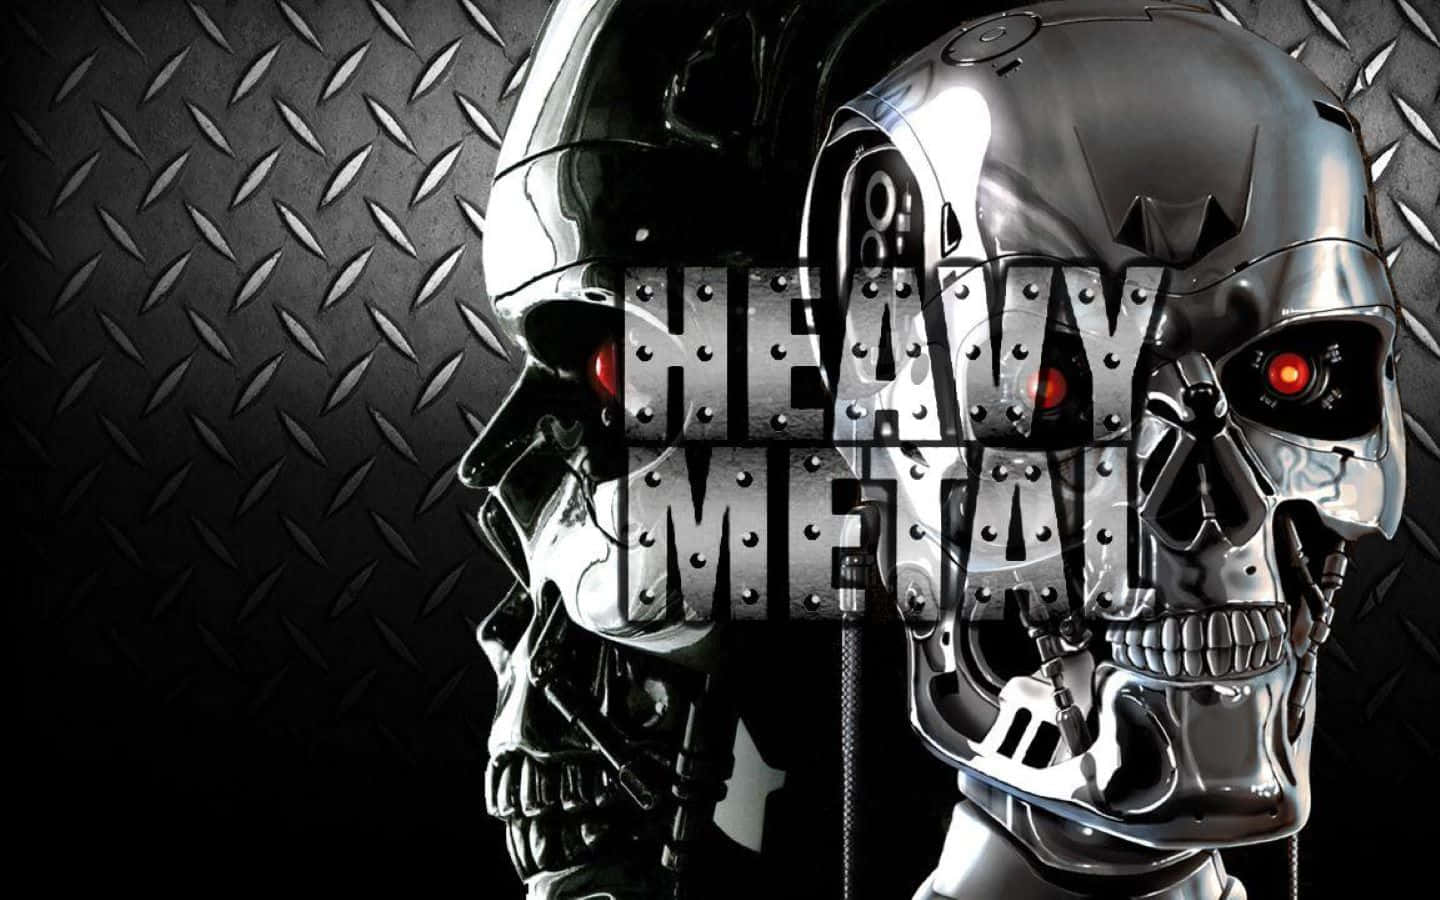 Rock On To Heavy Metal!